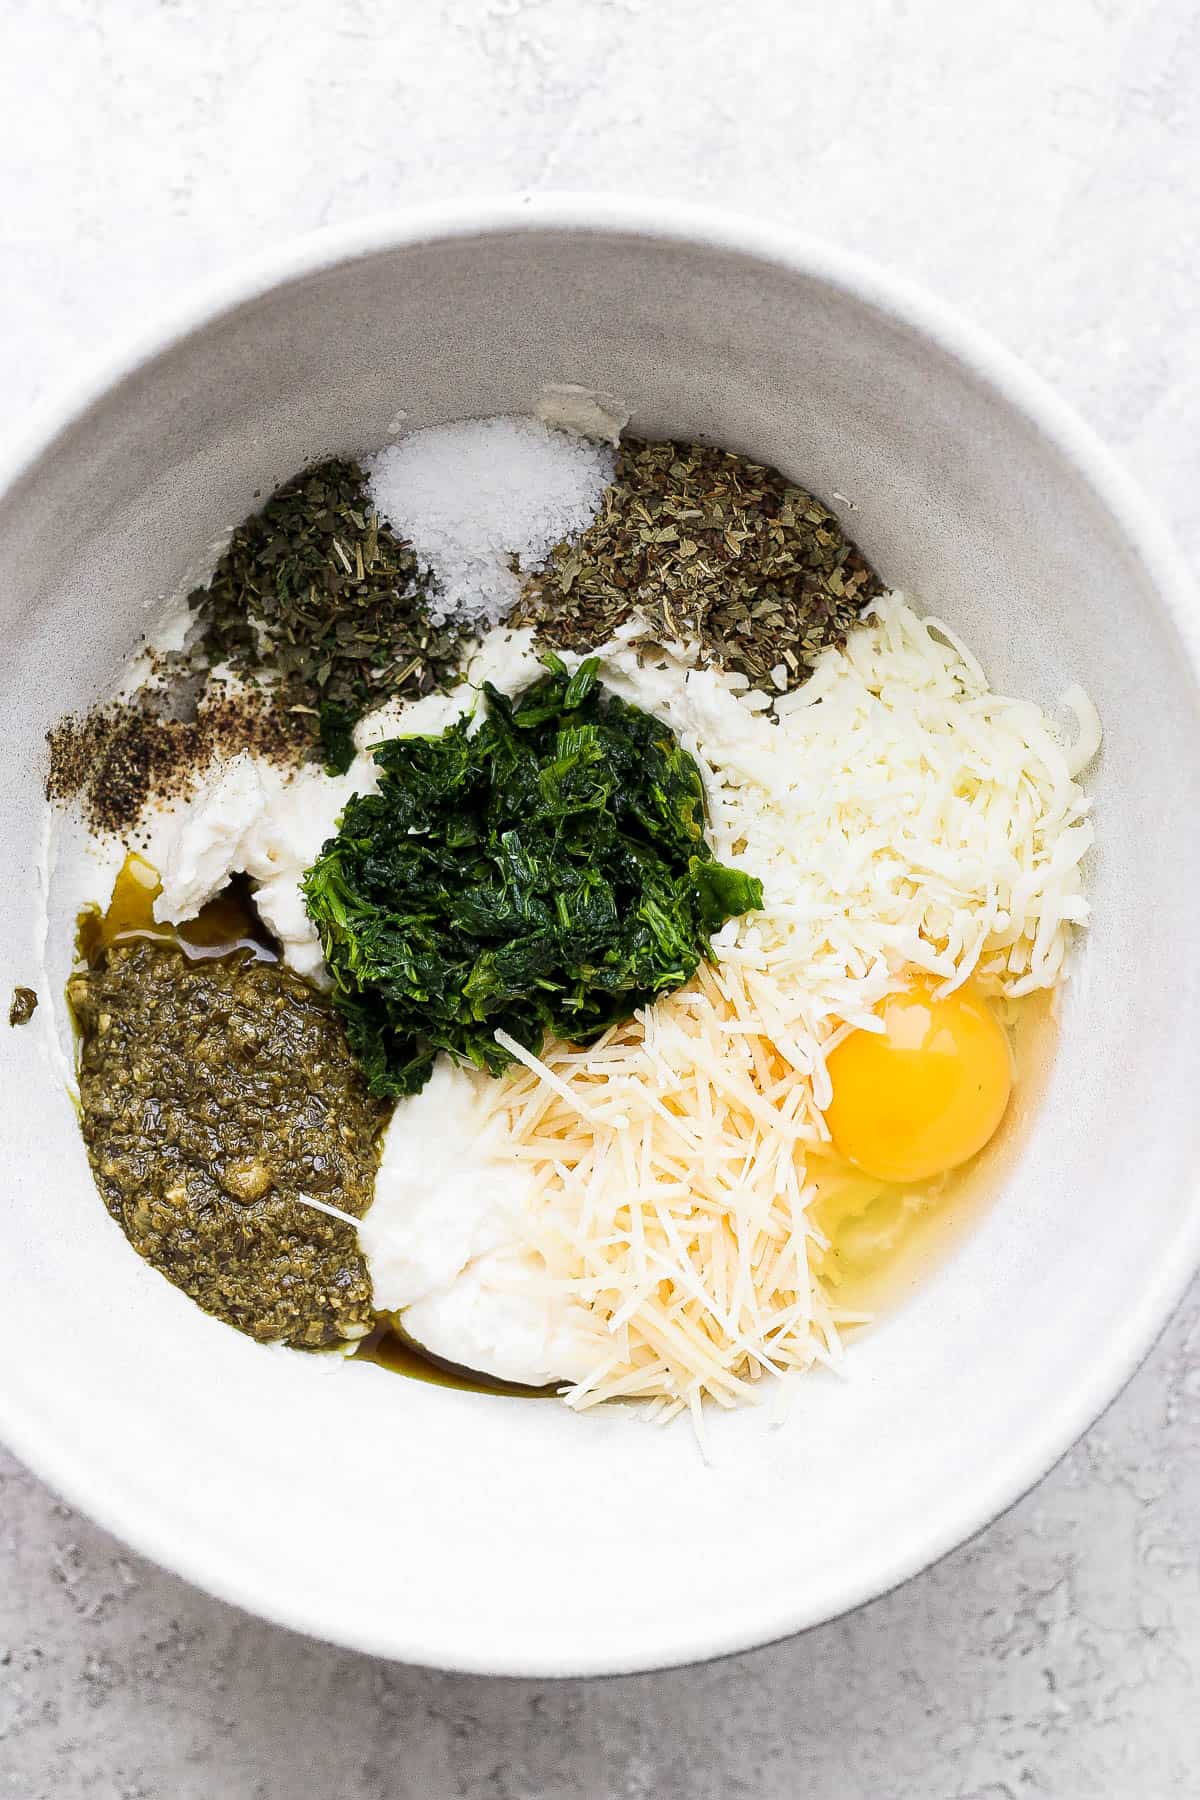 Ingredients for the ricotta cheese placed in a medium sized bowl: ricotta cheese, chopped spinach leaves, pesto, parmesan cheese, mozzarella cheese, lemon juice, Italian seasoning, fresh basil, egg, salt and pepper.